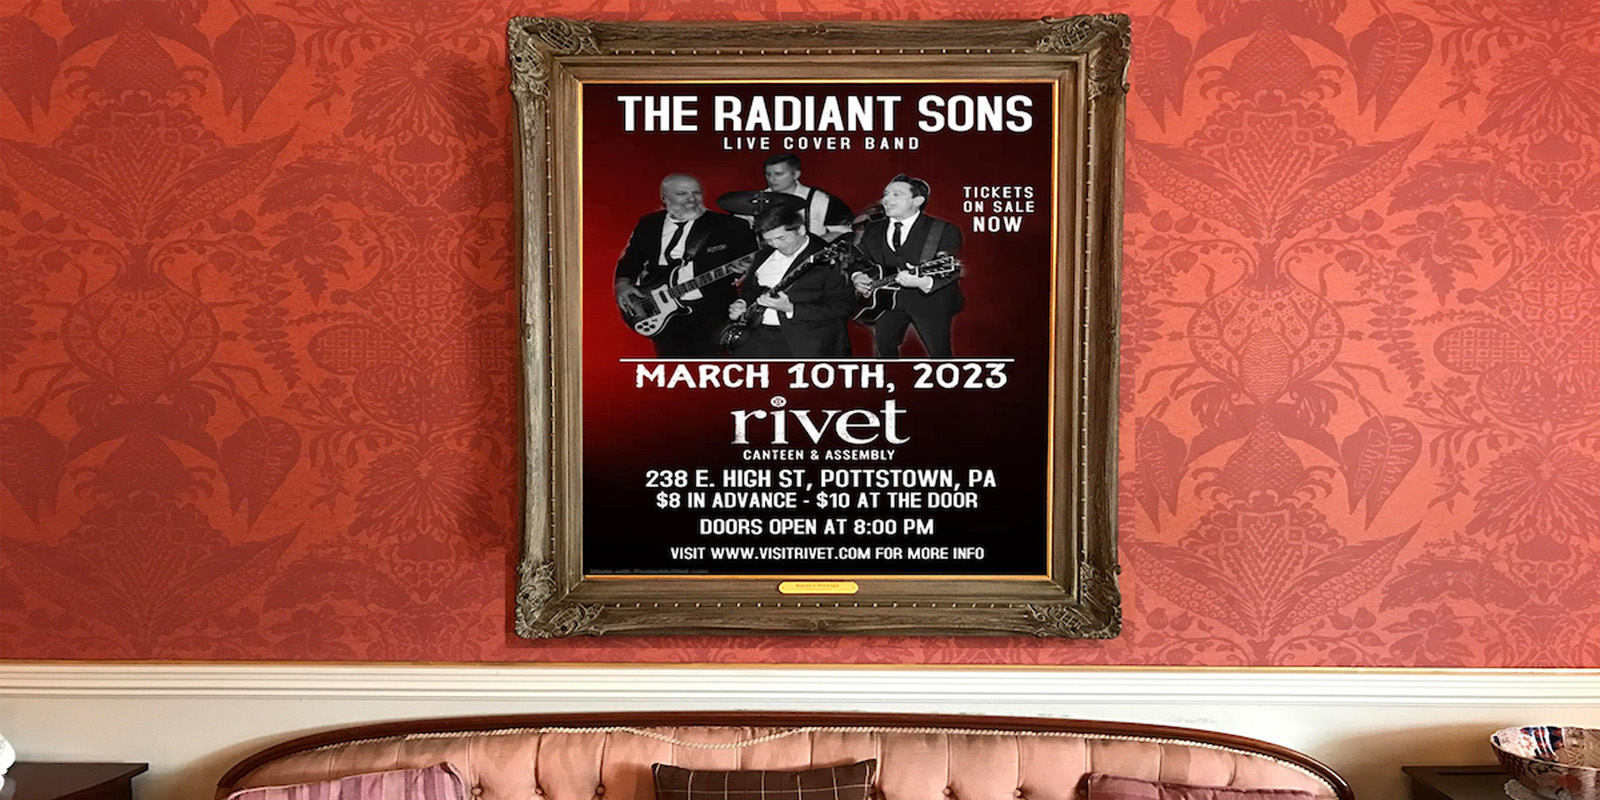 The Radiant Sons performing live at Rivet: Canteen & Assembly on Friday, March 10th, 2023!